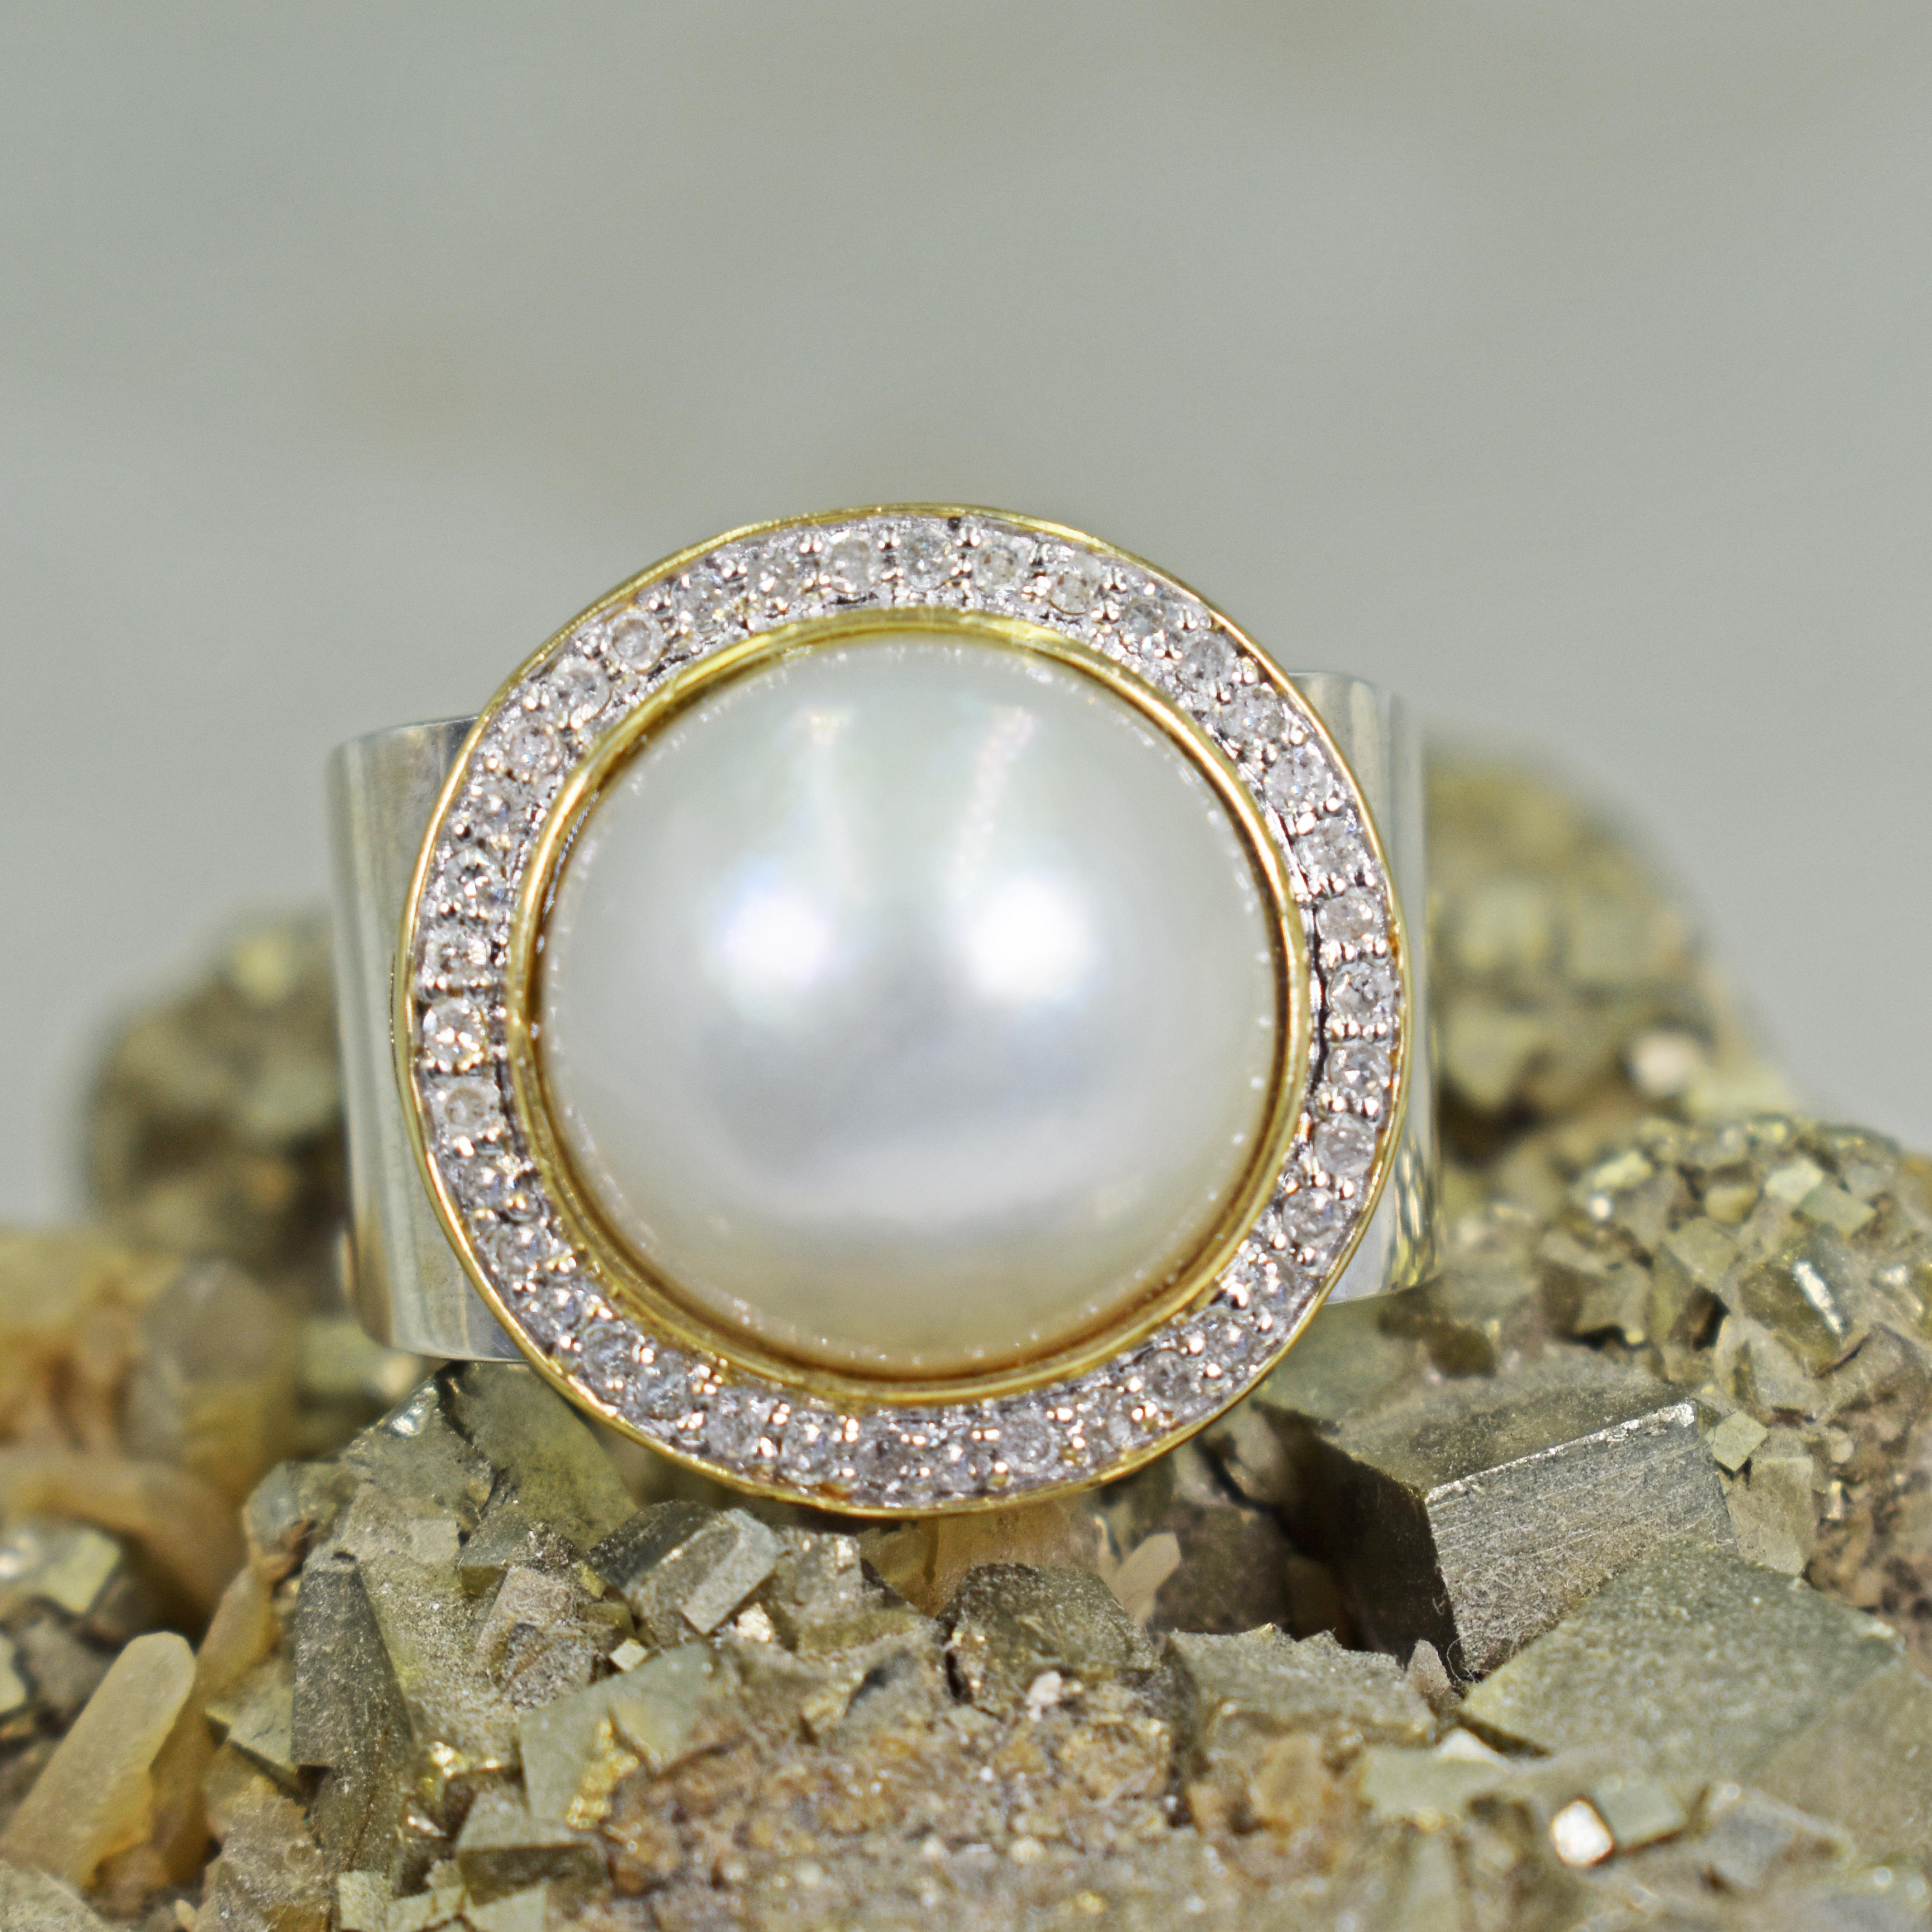 Beautiful, white Mabe Pearl set in 14k yellow gold and diamond halo on a square, tapered sterling silver ring band. Size 7. Base of ring band is 0.38 inch wide, and top of ring band is 0.50 inch wide. Pearl halo 14k gold top measures 0.75 inch in